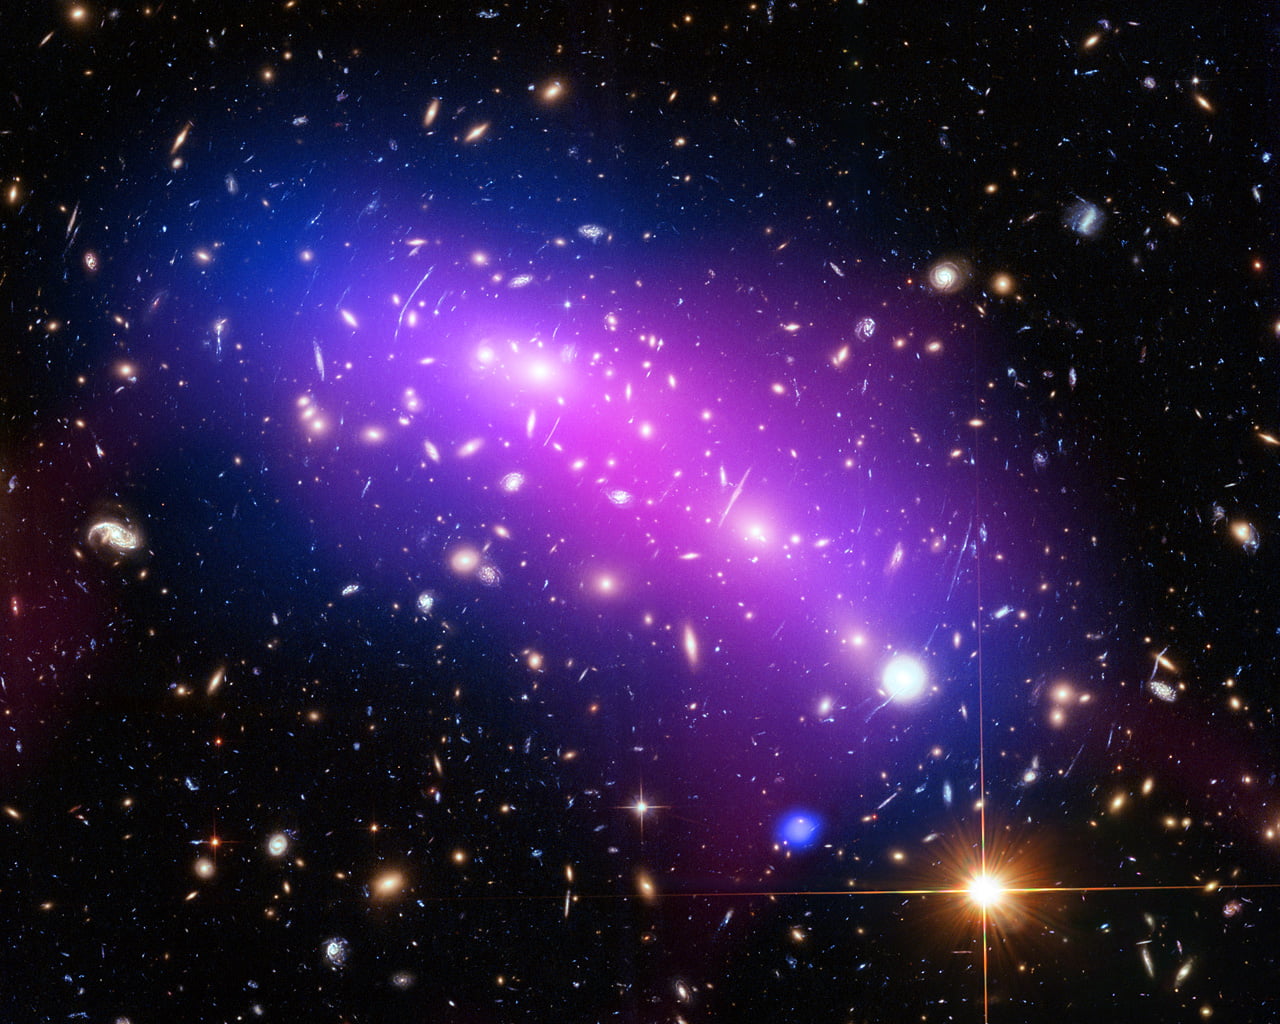 At first glance, this cosmic kaleidoscope of purple, blue and pink offers a strikingly beautiful — and serene — snapshot of the cosmos. However, this multi-coloured haze actually marks the site of two colliding galaxy clusters, forming a single object known as MACS J0416.1-2403 (or MACS J0416 for short). MACS J0416 is located about 4.3 billion light-years from Earth, in the constellation of Eridanus. This new image of the cluster combines data from three different telescopes: the NASA/ESA Hubble Space Telescope (showing the galaxies and stars), the NASA Chandra X-ray Observatory (diffuse emission in blue), and the NRAO Jansky Very Large Array (diffuse emission in pink). Each telescope shows a different element of the cluster, allowing astronomers to study MACS J0416 in detail. As with all galaxy clusters, MACS J0416 contains a significant amount of dark matter, which leaves a detectable imprint in visible light by distorting the images of background galaxies. In this image, this dark matter appears to align well with the blue-hued hot gas, suggesting that the two clusters have not yet collided; if the clusters had already smashed into one another, the dark matter and gas would have separated. MACS J0416 also contains other features — such as a compact core of hot gas — that would likely have been disrupted had a collision already occurred. Together with five other galaxy clusters, MACS J0416 is playing a leading role in the Hubble Frontier Fields programme, for which this data was obtained. Owing to its huge mass, the cluster is in fact bending the light of background objects, acting as a magnifying lens. Astronomers can use this phenomenon to find galaxies that existed only hundreds of million years after the big bang. For more information on both Frontier Fields and the phenomenon of gravitational lensing, see Hubblecast 90: The final frontier. Links  Hubblecast 90: The final      frontier Link to Hubblesite release